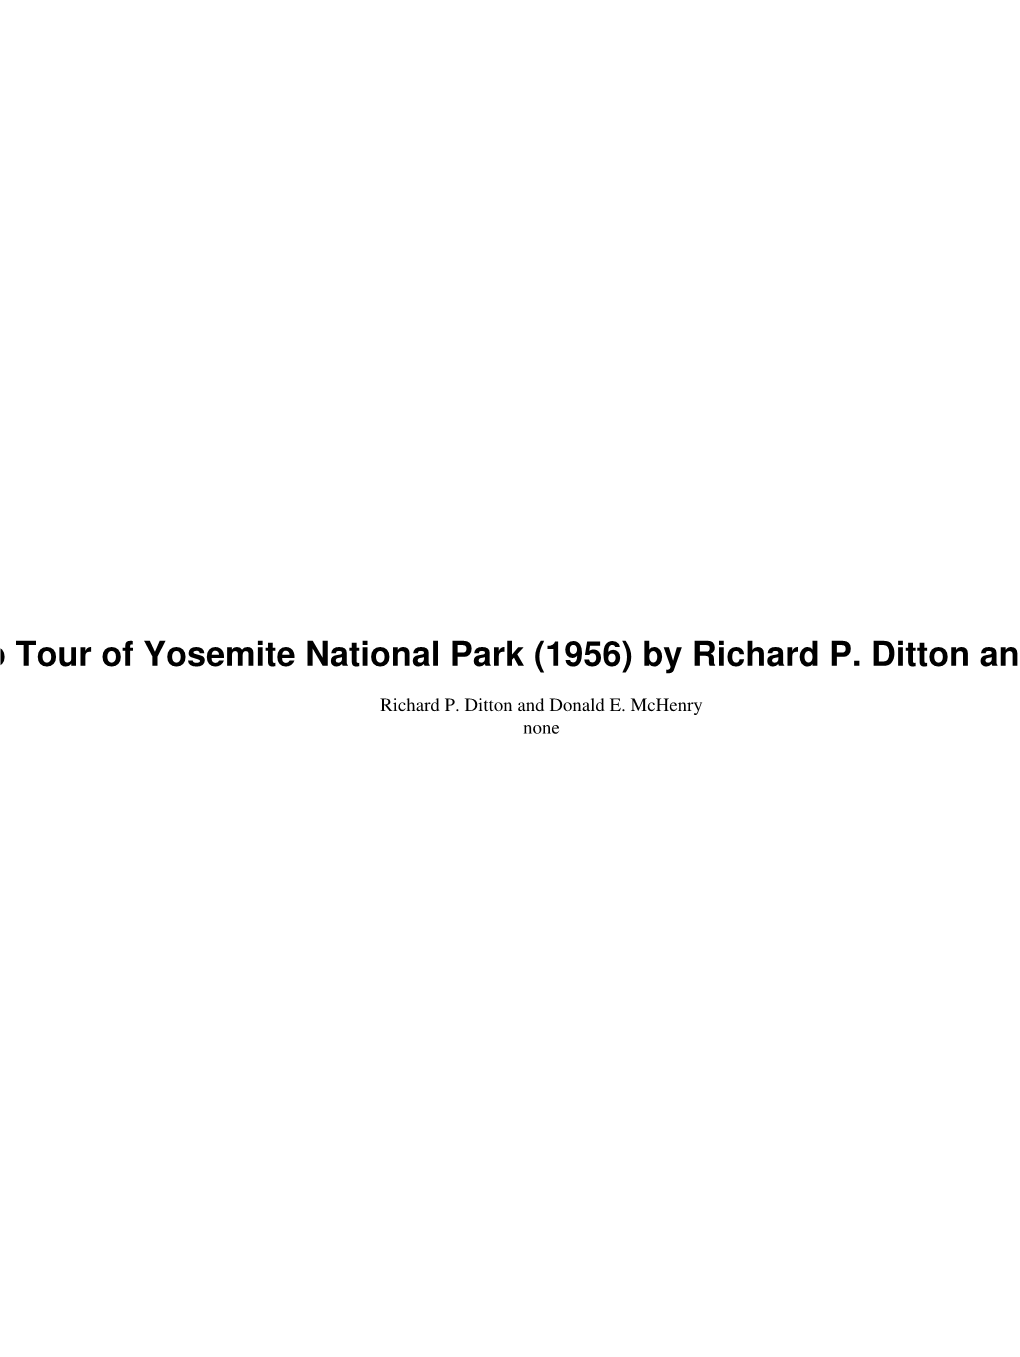 Self-Guiding Auto Tour of Yosemite National Park (1956) by Richard P. Ditton and Donald E. Mchenry